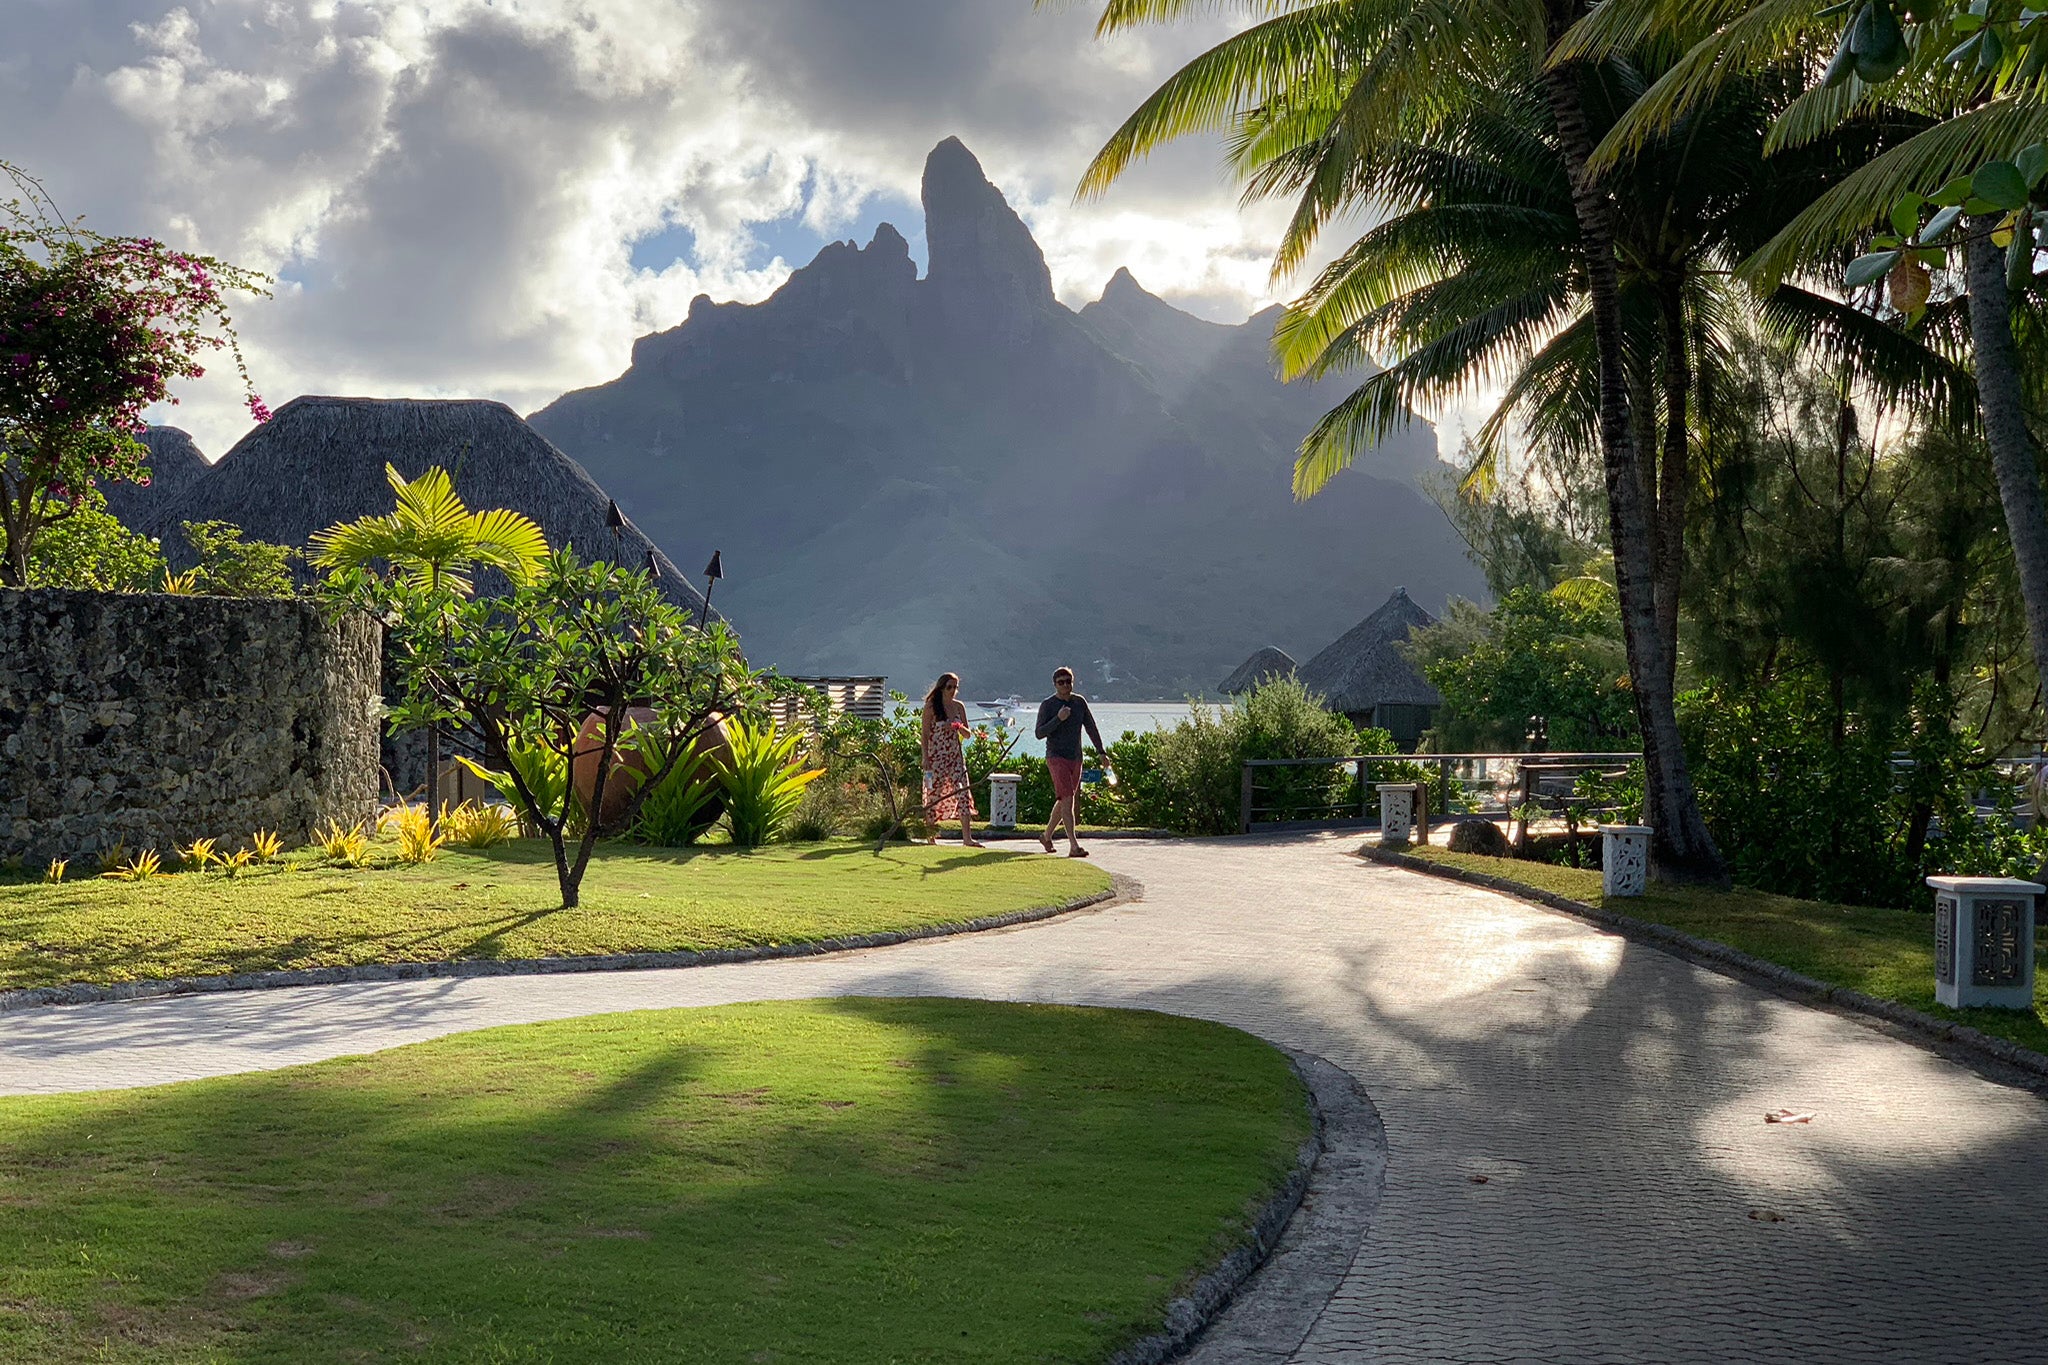 people walk on a garden path at a luxury hotel on an island